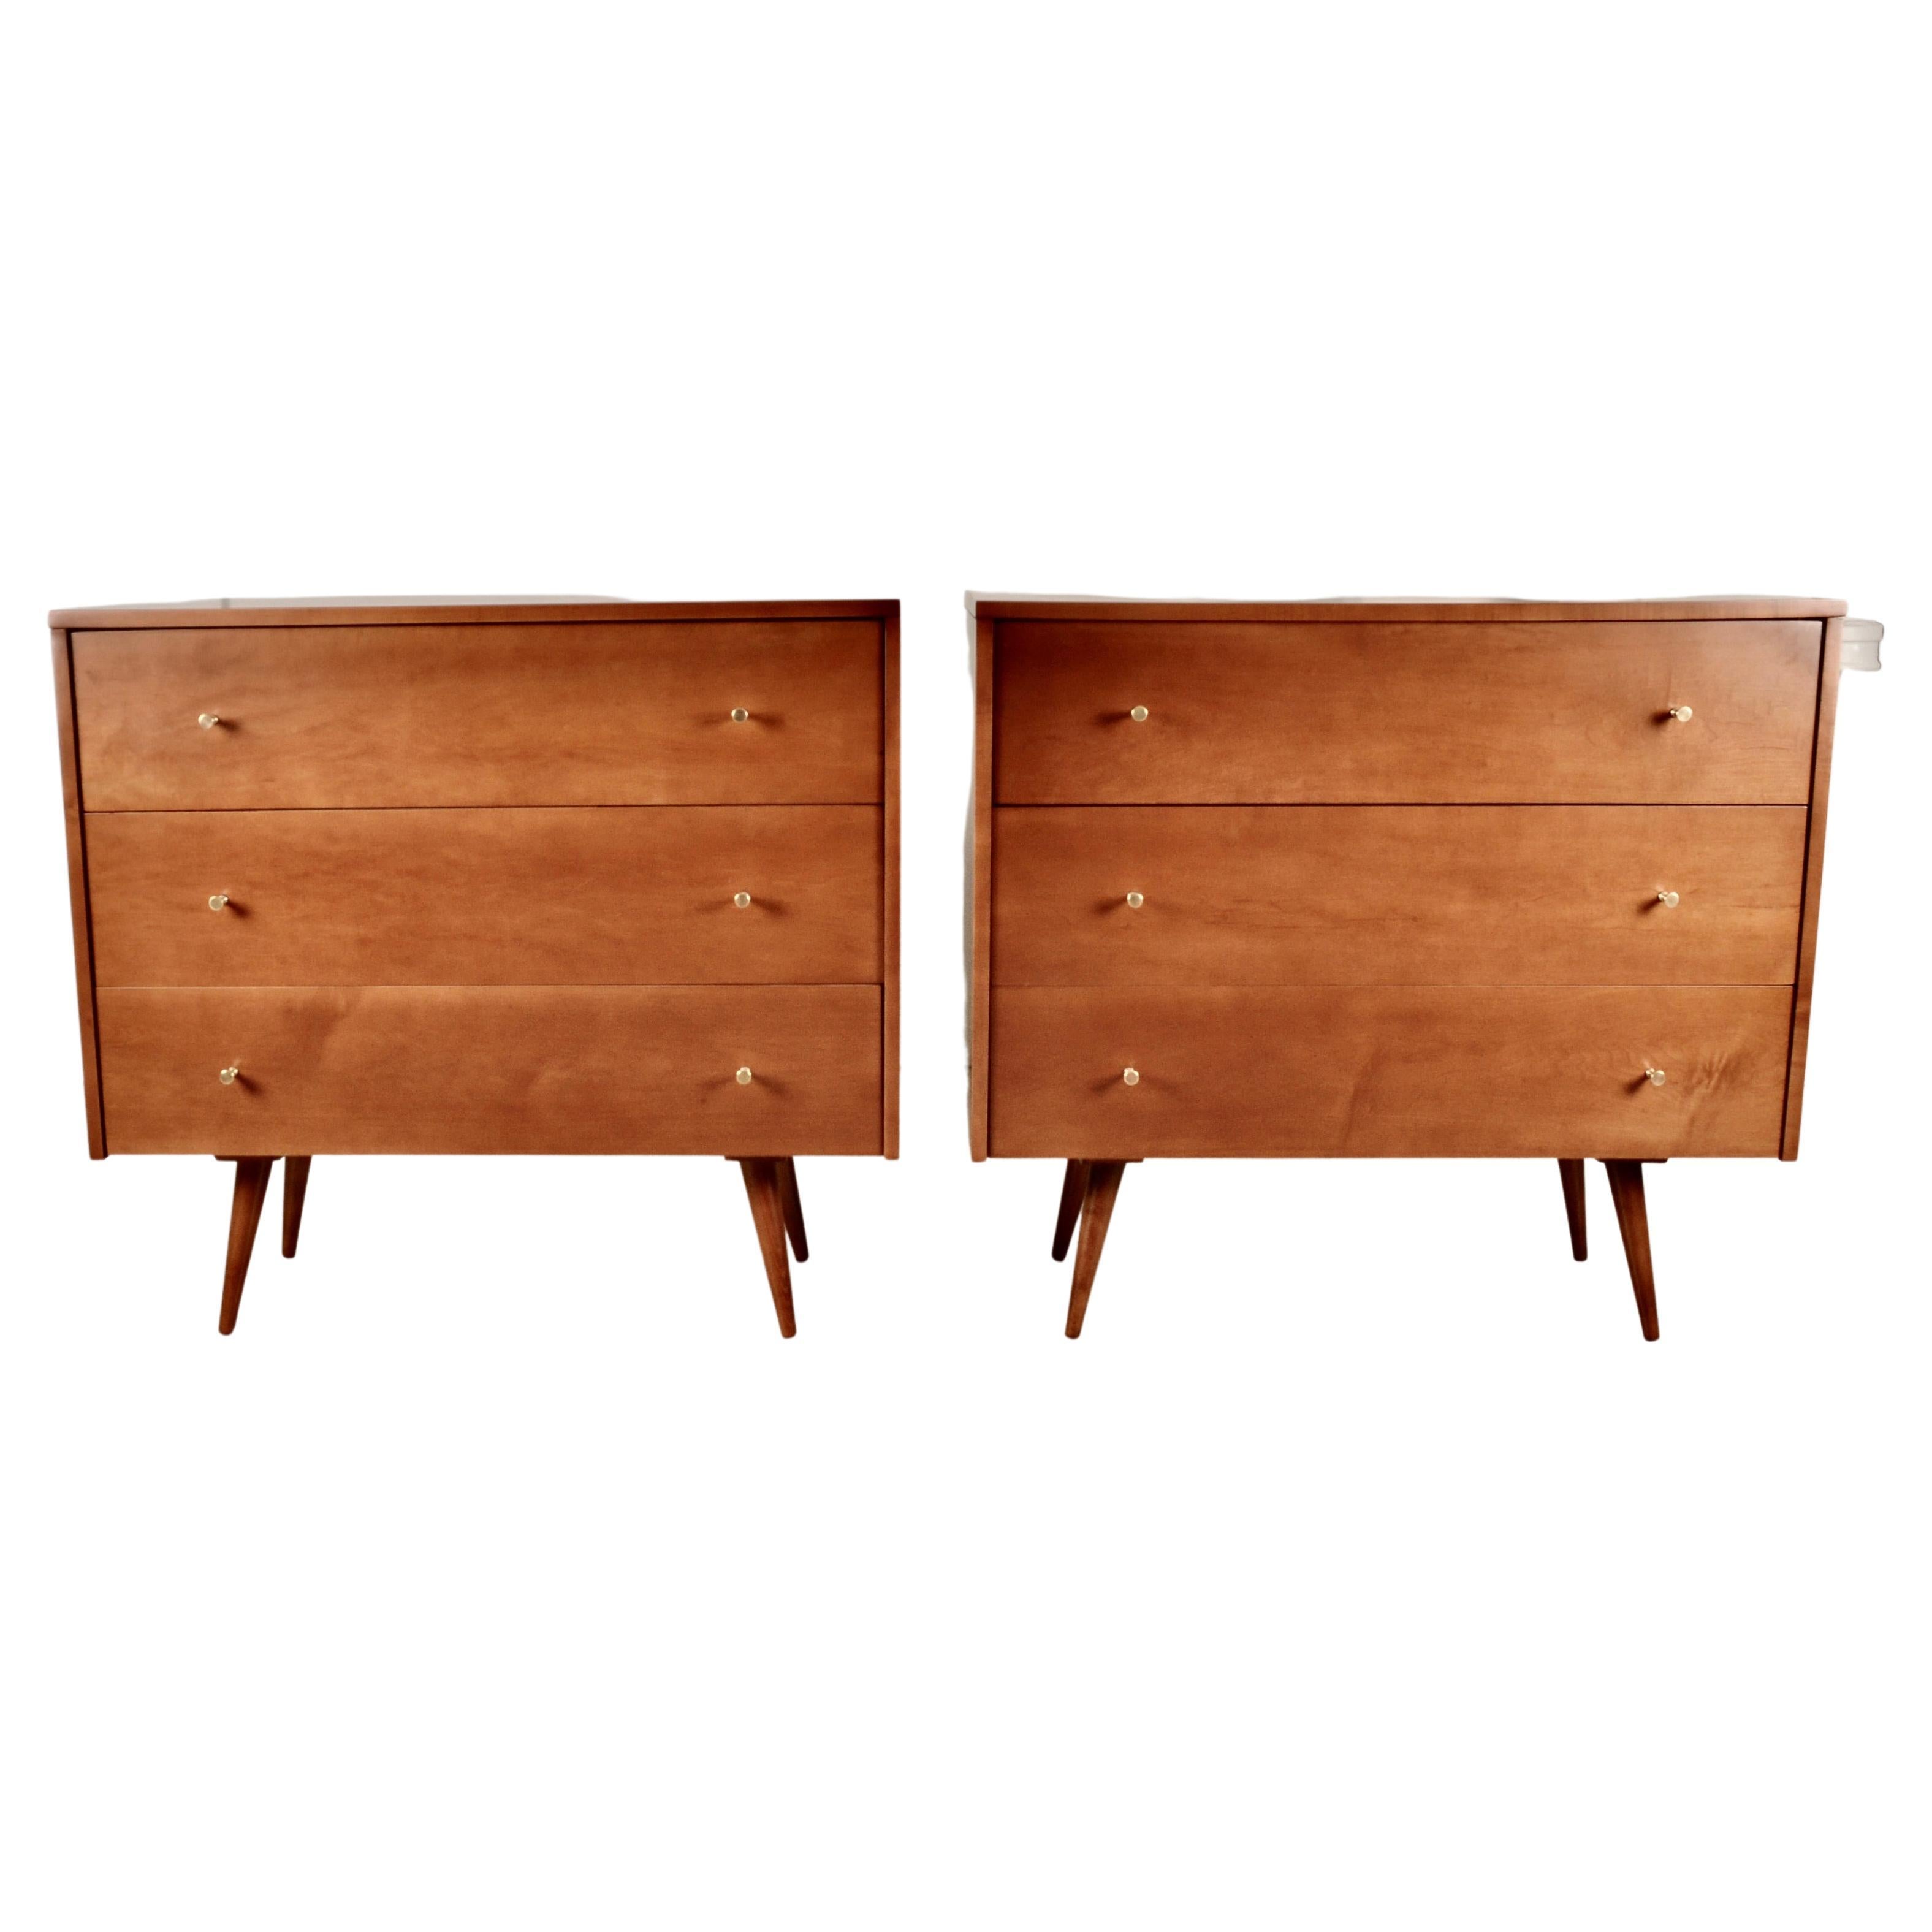 An iconic pair of McCobb chests, manufacturers by Planner Group circa 1950s. Distinctive modern legs. Original solid brass custom pulls. This pair has been fully refinished in a satin lacquer finish. Very fine restored condition.